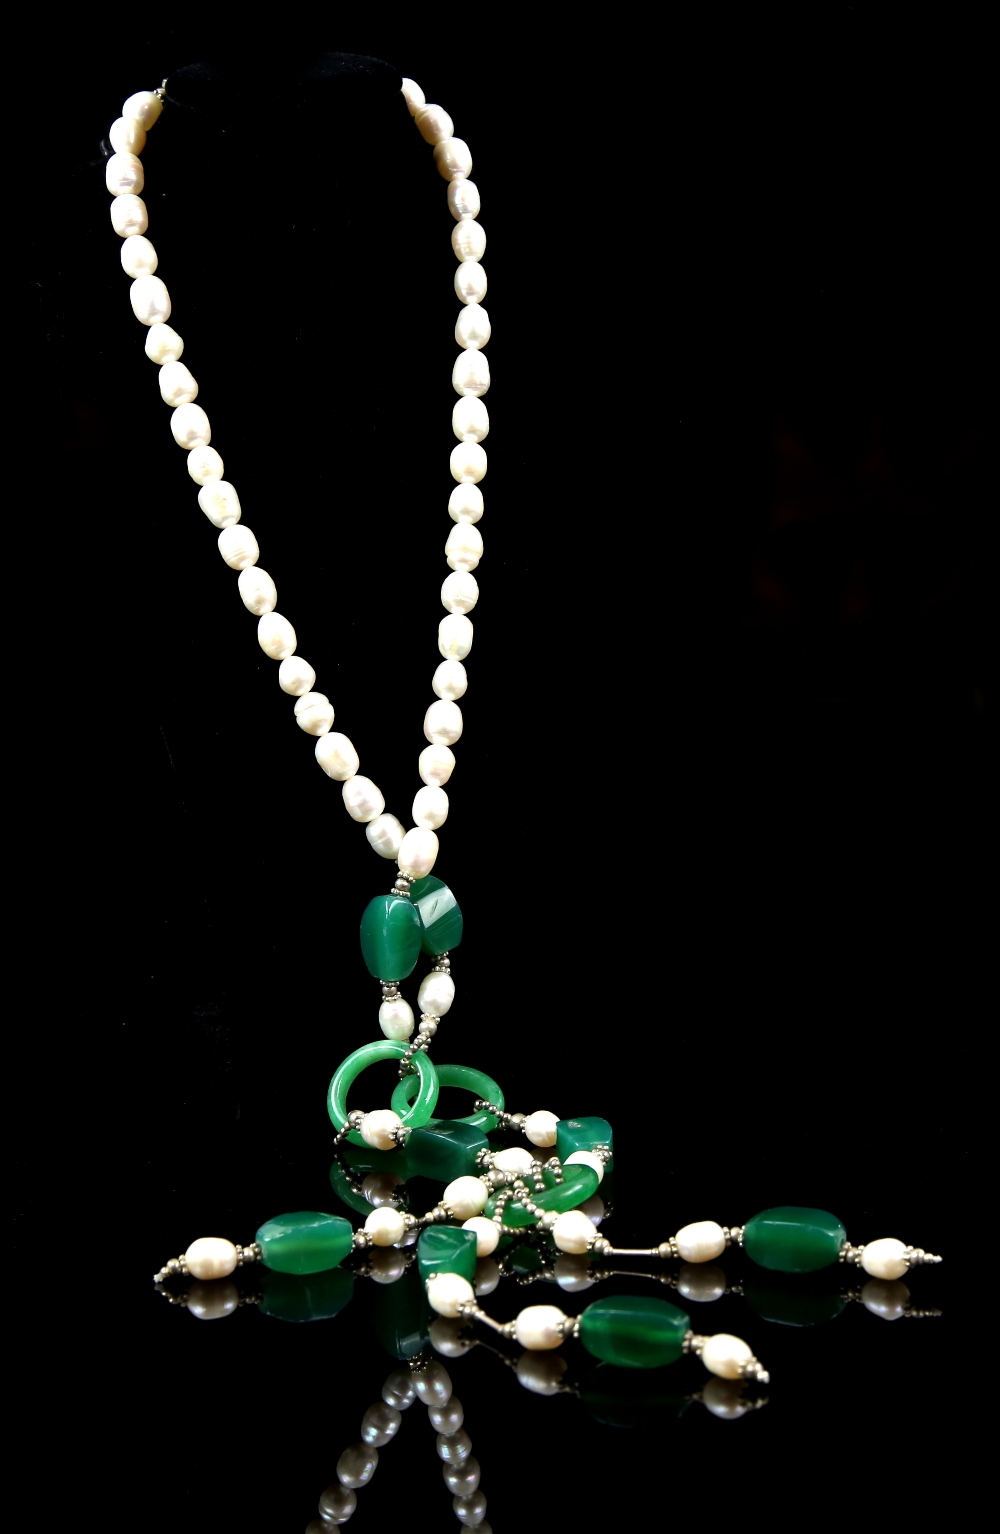 Flapper girl style pendant necklace of pearls green chalcedony and silver . - Image 2 of 2